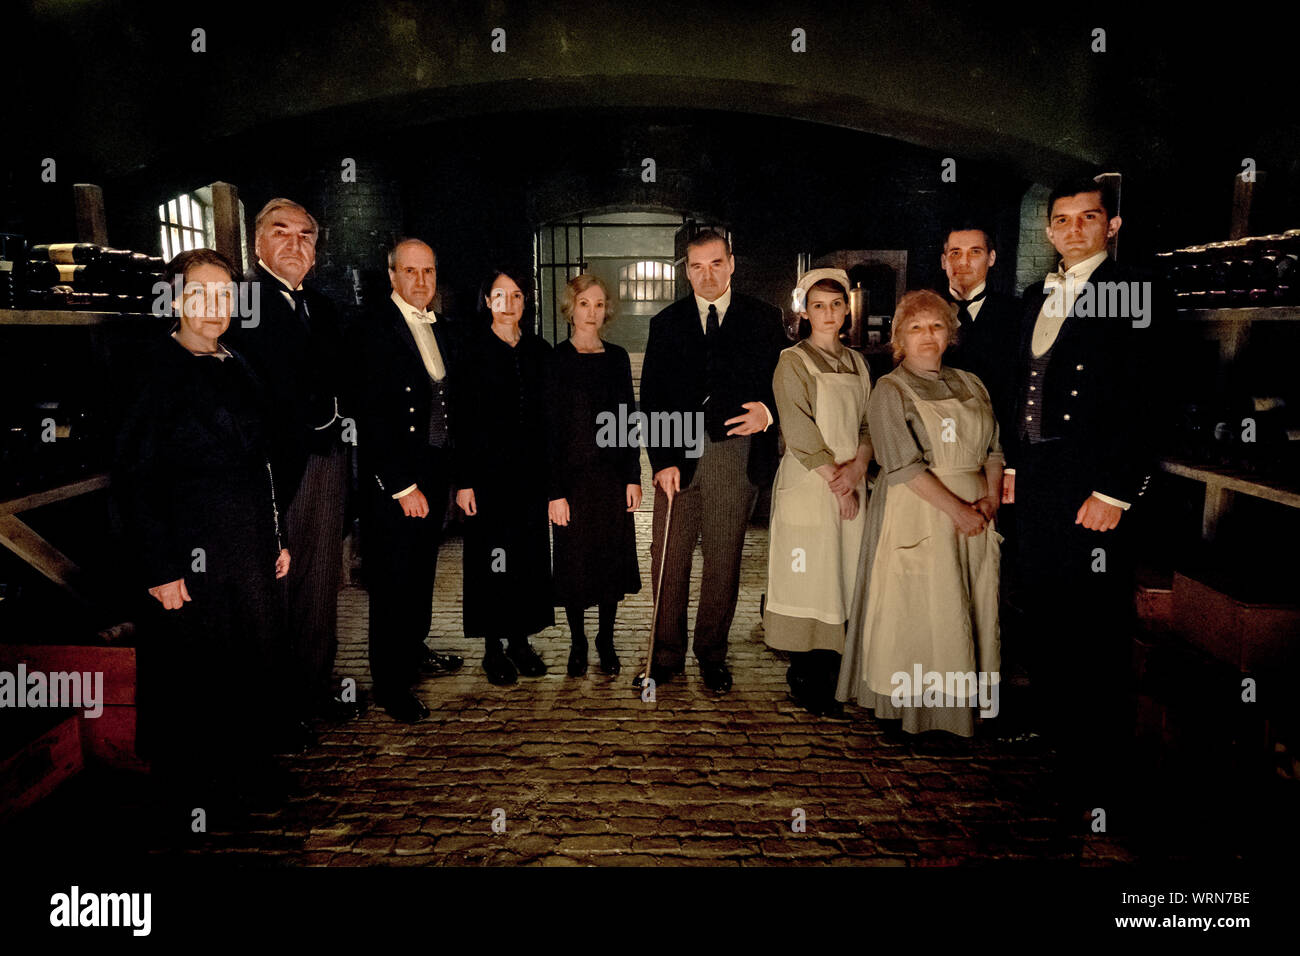 RELEASE DATE: September 20, 2019 TITLE: Downton Abbey STUDIO: Focus Features DIRECTOR: Michael Engler PLOT: Adapted from the hit TV series Downton Abbey that tells the story of the Crawley family, a wealthy owner of a large estate in the English countryside in the early 20th century. STARRING: (L to R) Phyllis Logan stars as Mrs. Hughes, Jim Carter as Mr. Carson, Kevin Doyle as Mr. Molesley, Raquel Cassidy as Miss Baxter, Joanne Froggatt as Anna Bates, Brendan Coyle as Mr. Bates, Sophie McShera as Daisy, Lesley Nicol as Mrs. Patmore, Robert James-Collier as Thomas Barrow and Michael C. Fox as Stock Photo